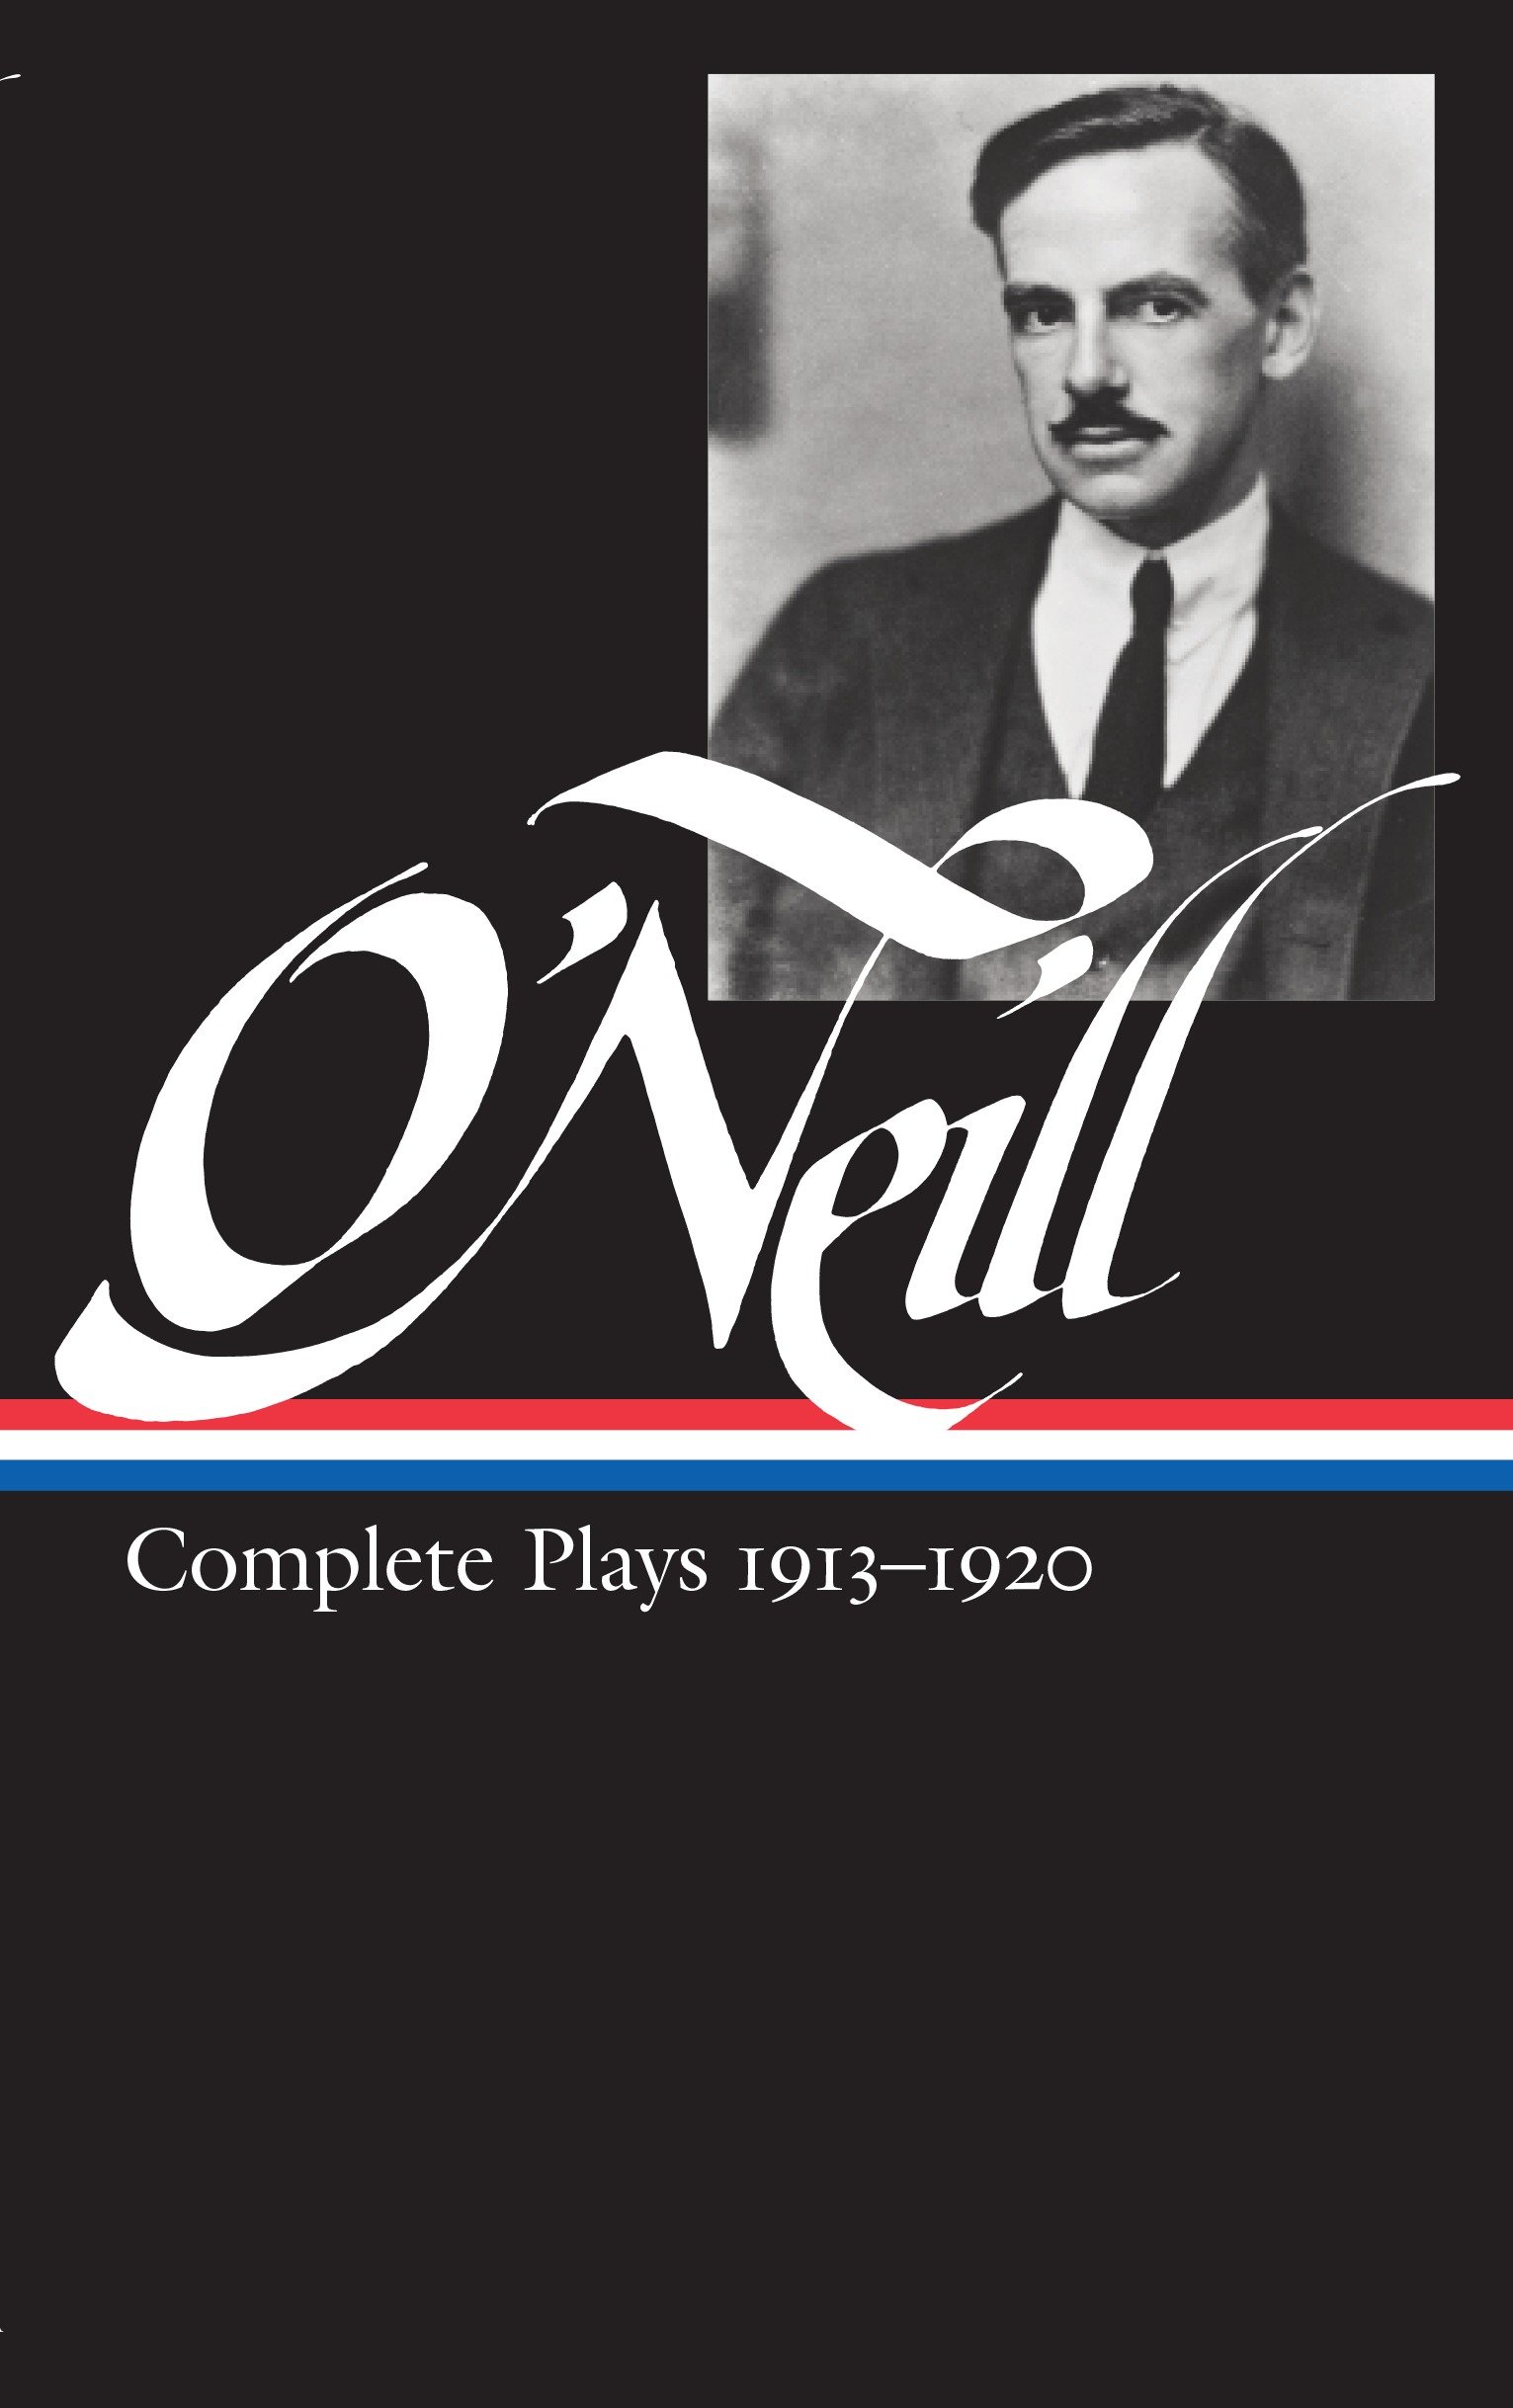 Eugene O'Neill: Complete Plays Volume 1 1913-1920 (Loa #40) (Hardcover Book)